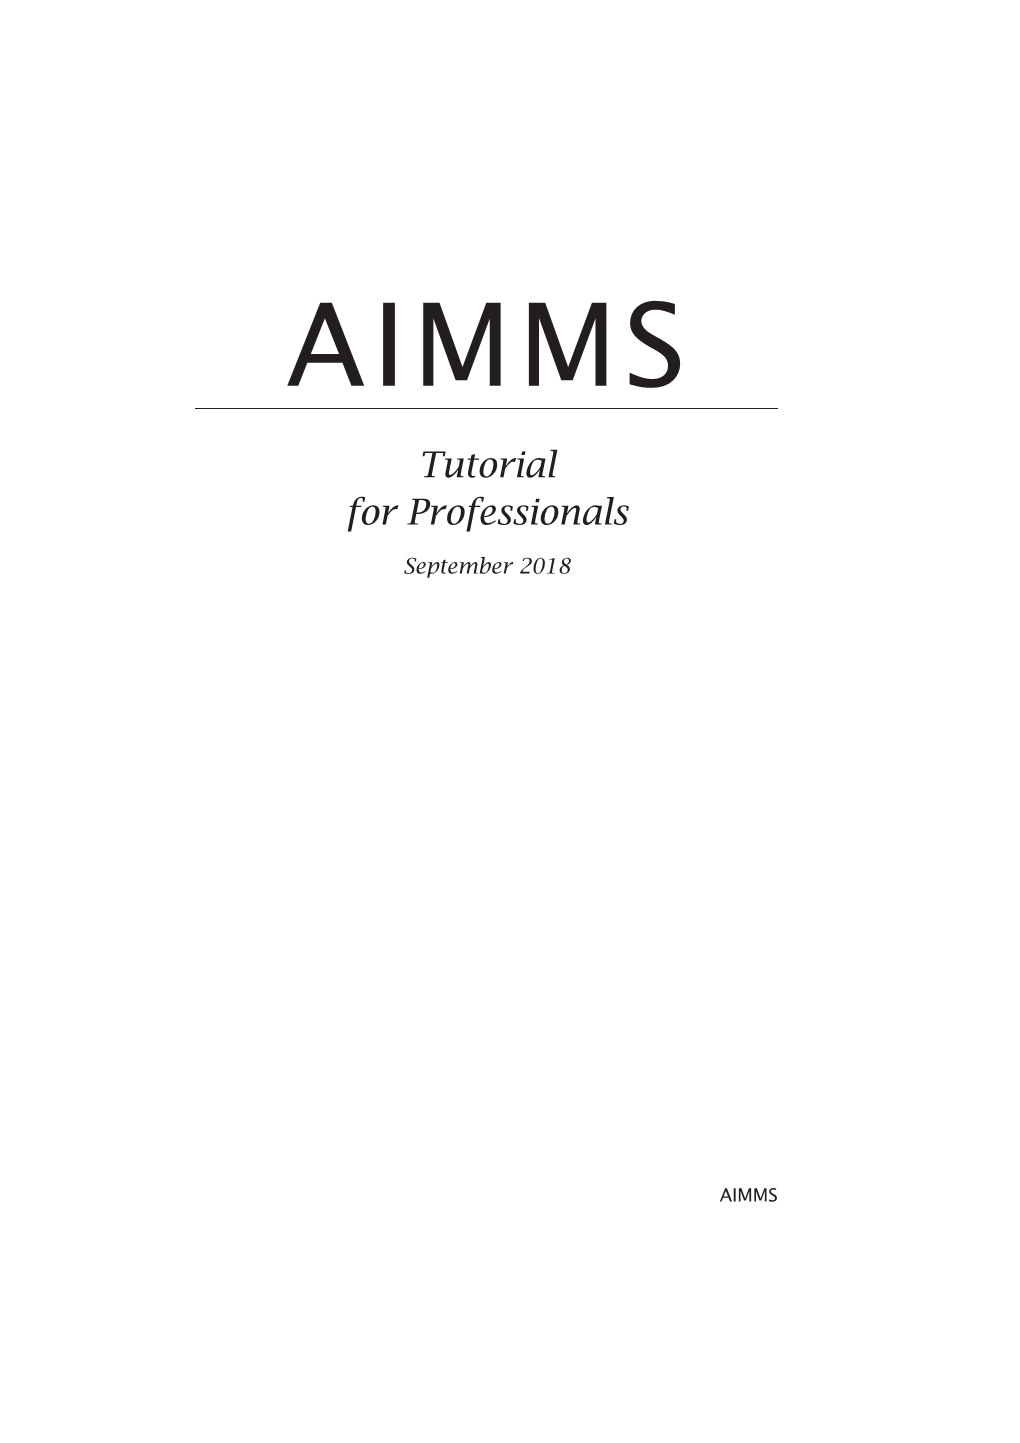 Aimms Tutorial for Professionals